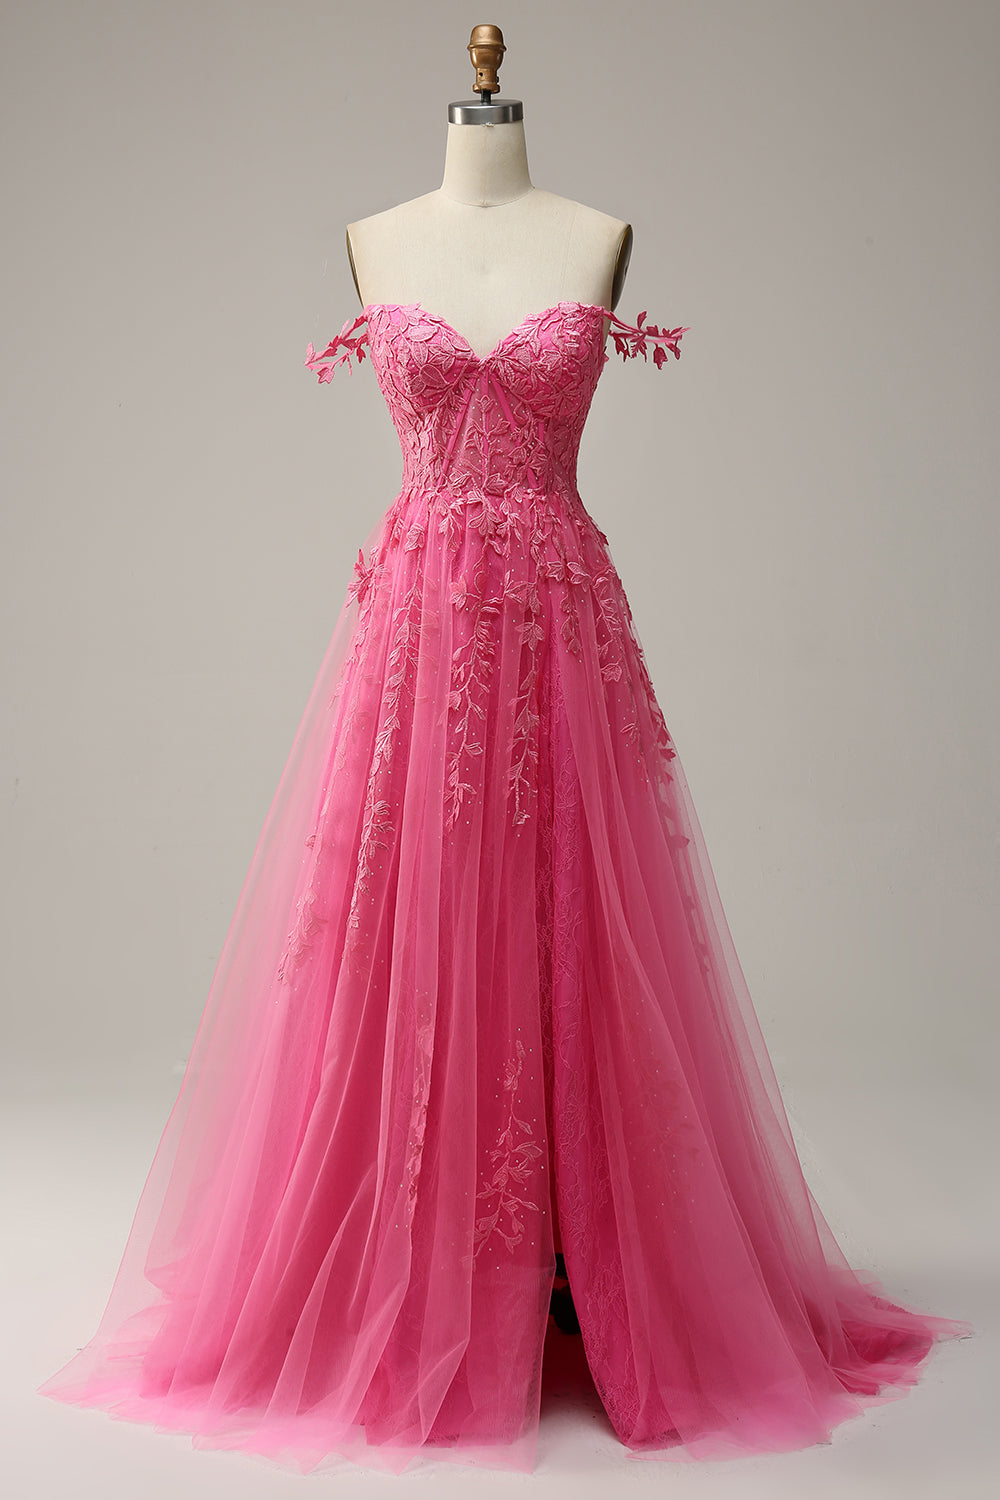 Off the Shoulder Hot Pink Prom Dress with Appliques